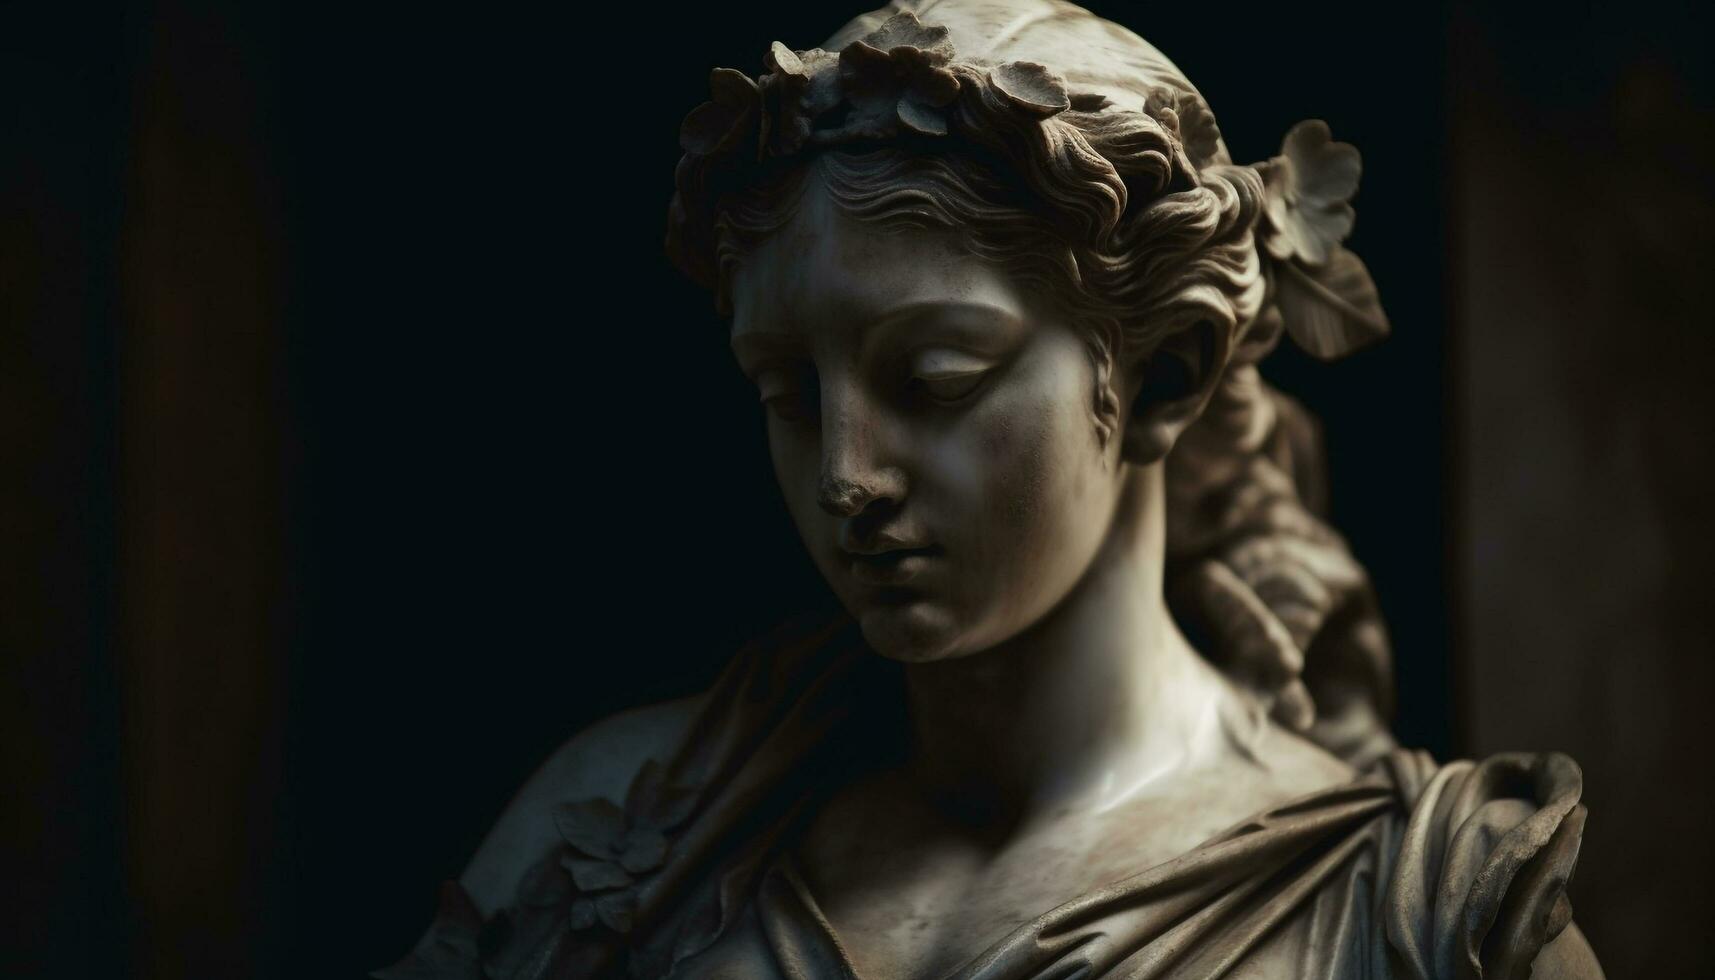 Gothic statue of grief stricken woman praying generated by AI photo